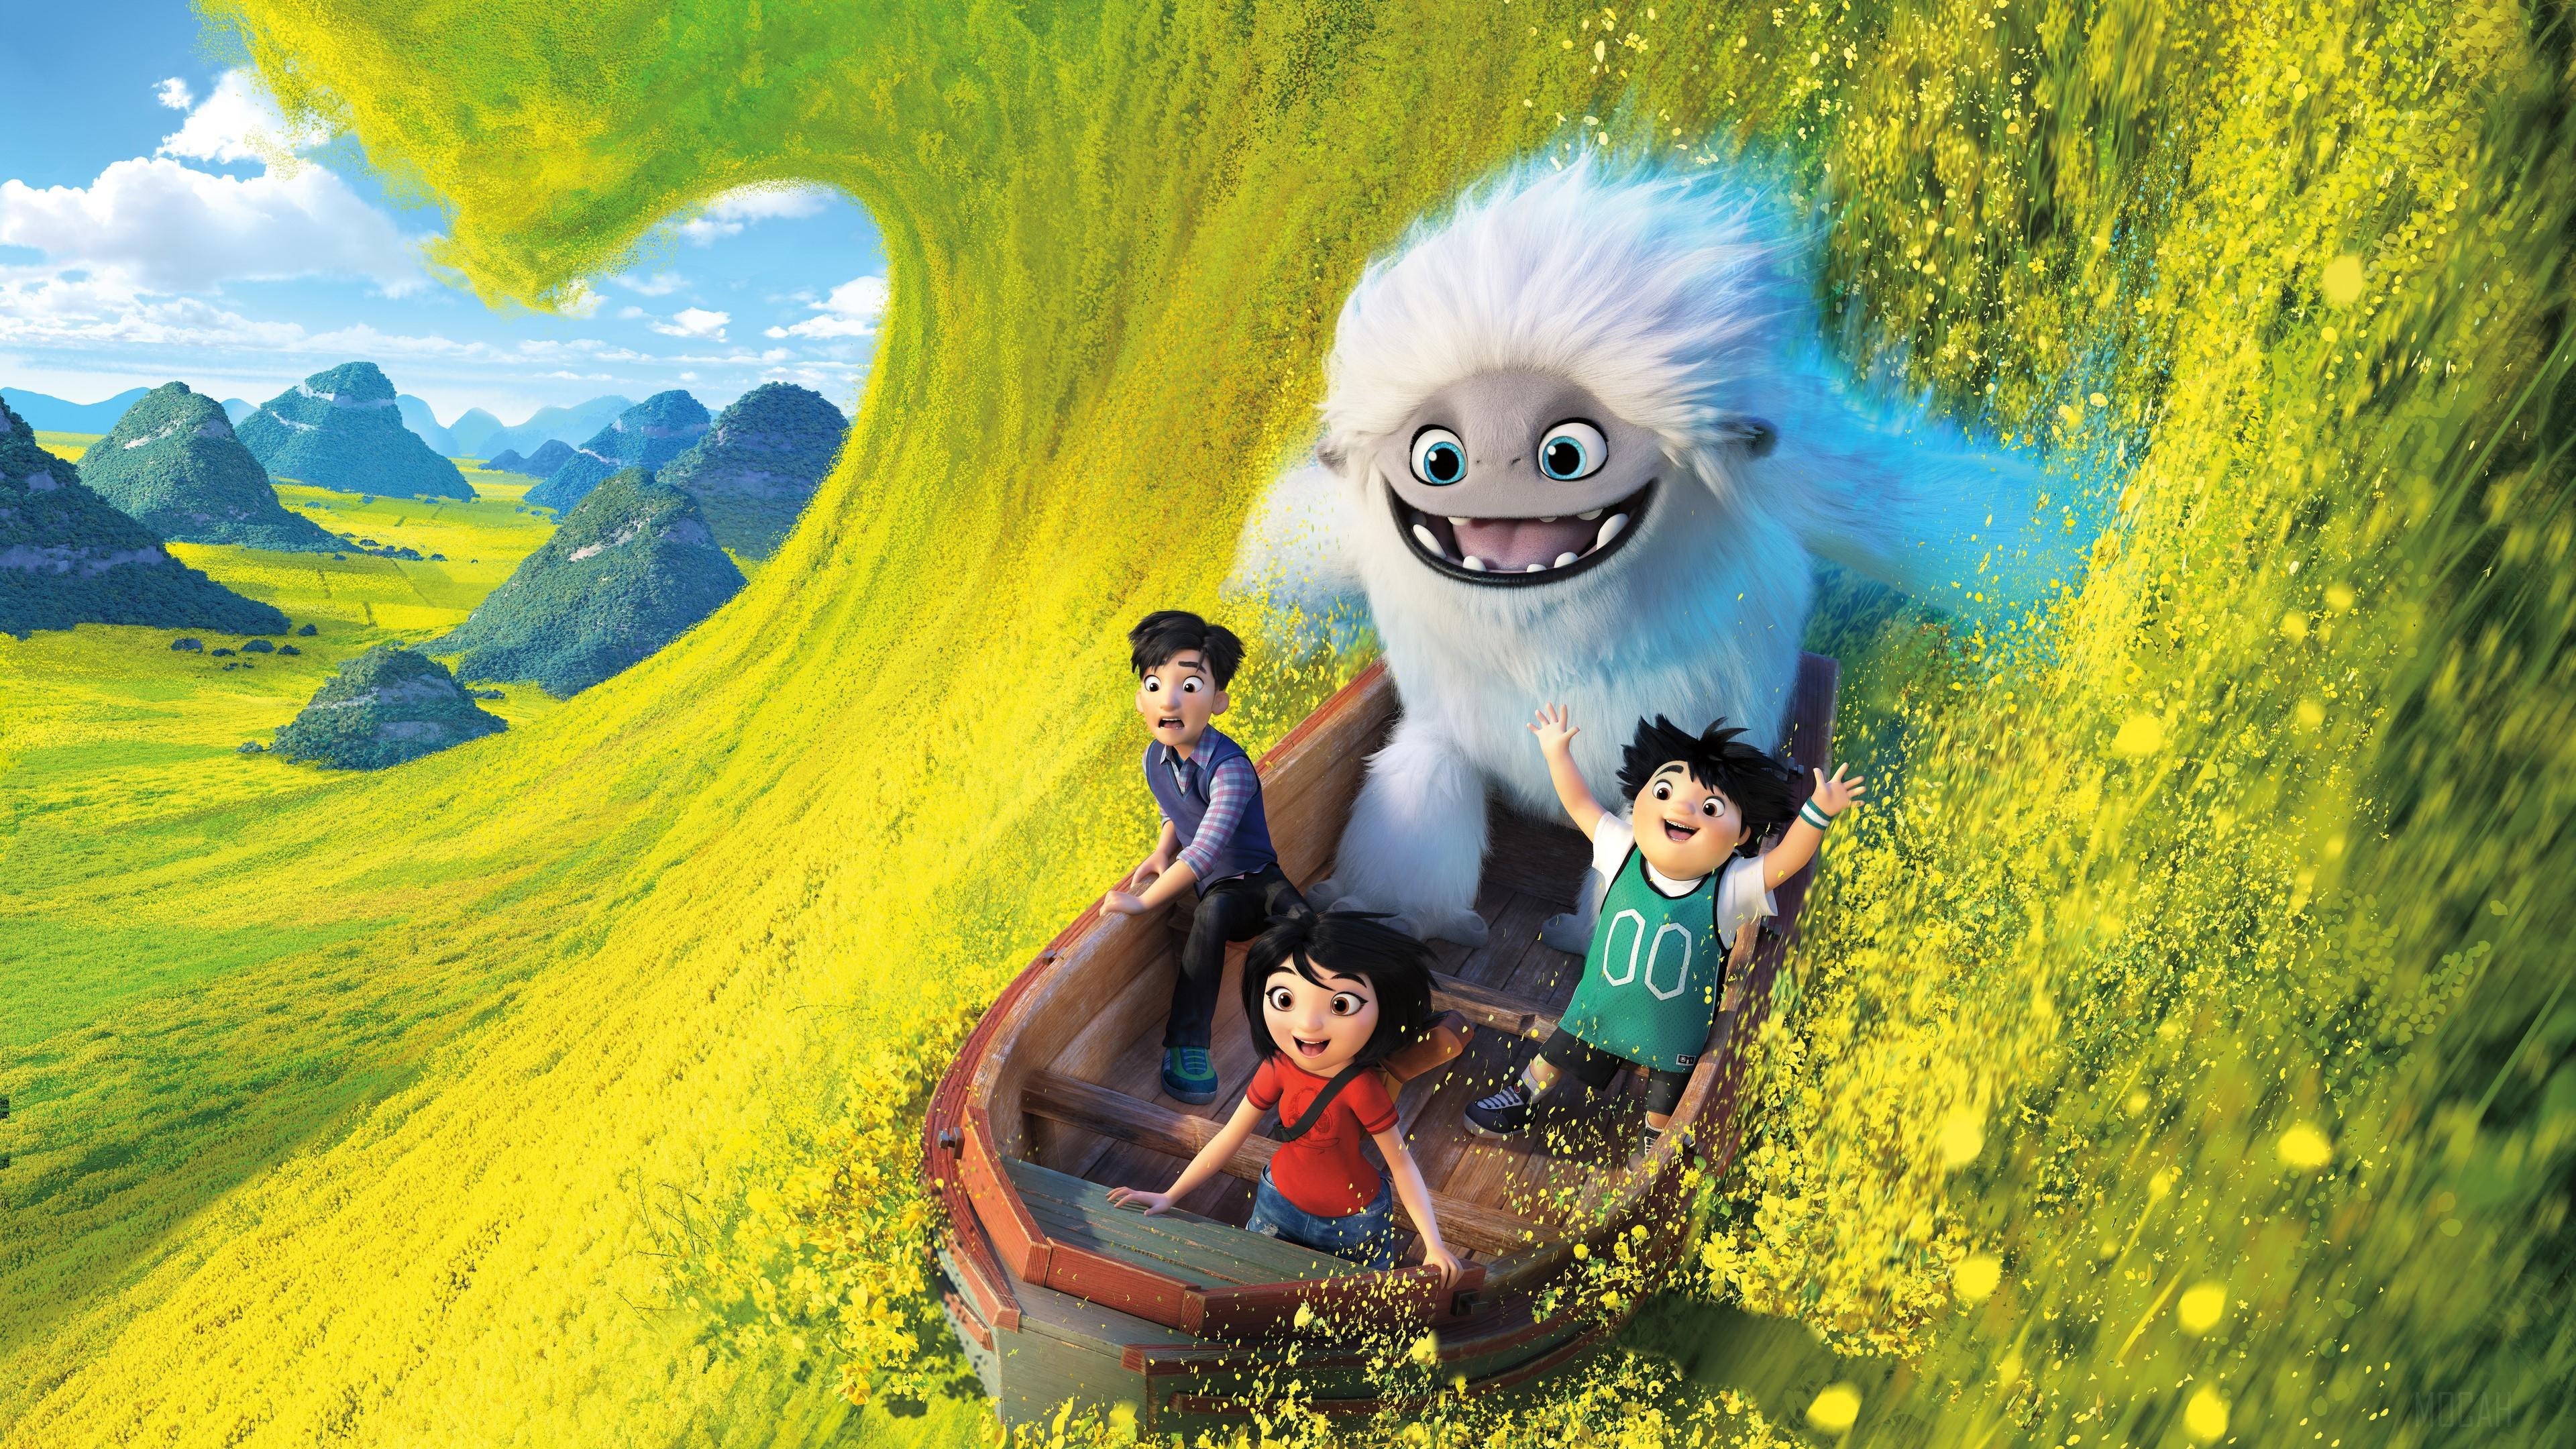 HD wallpaper, Abominable 2019 Animated Movie 4K